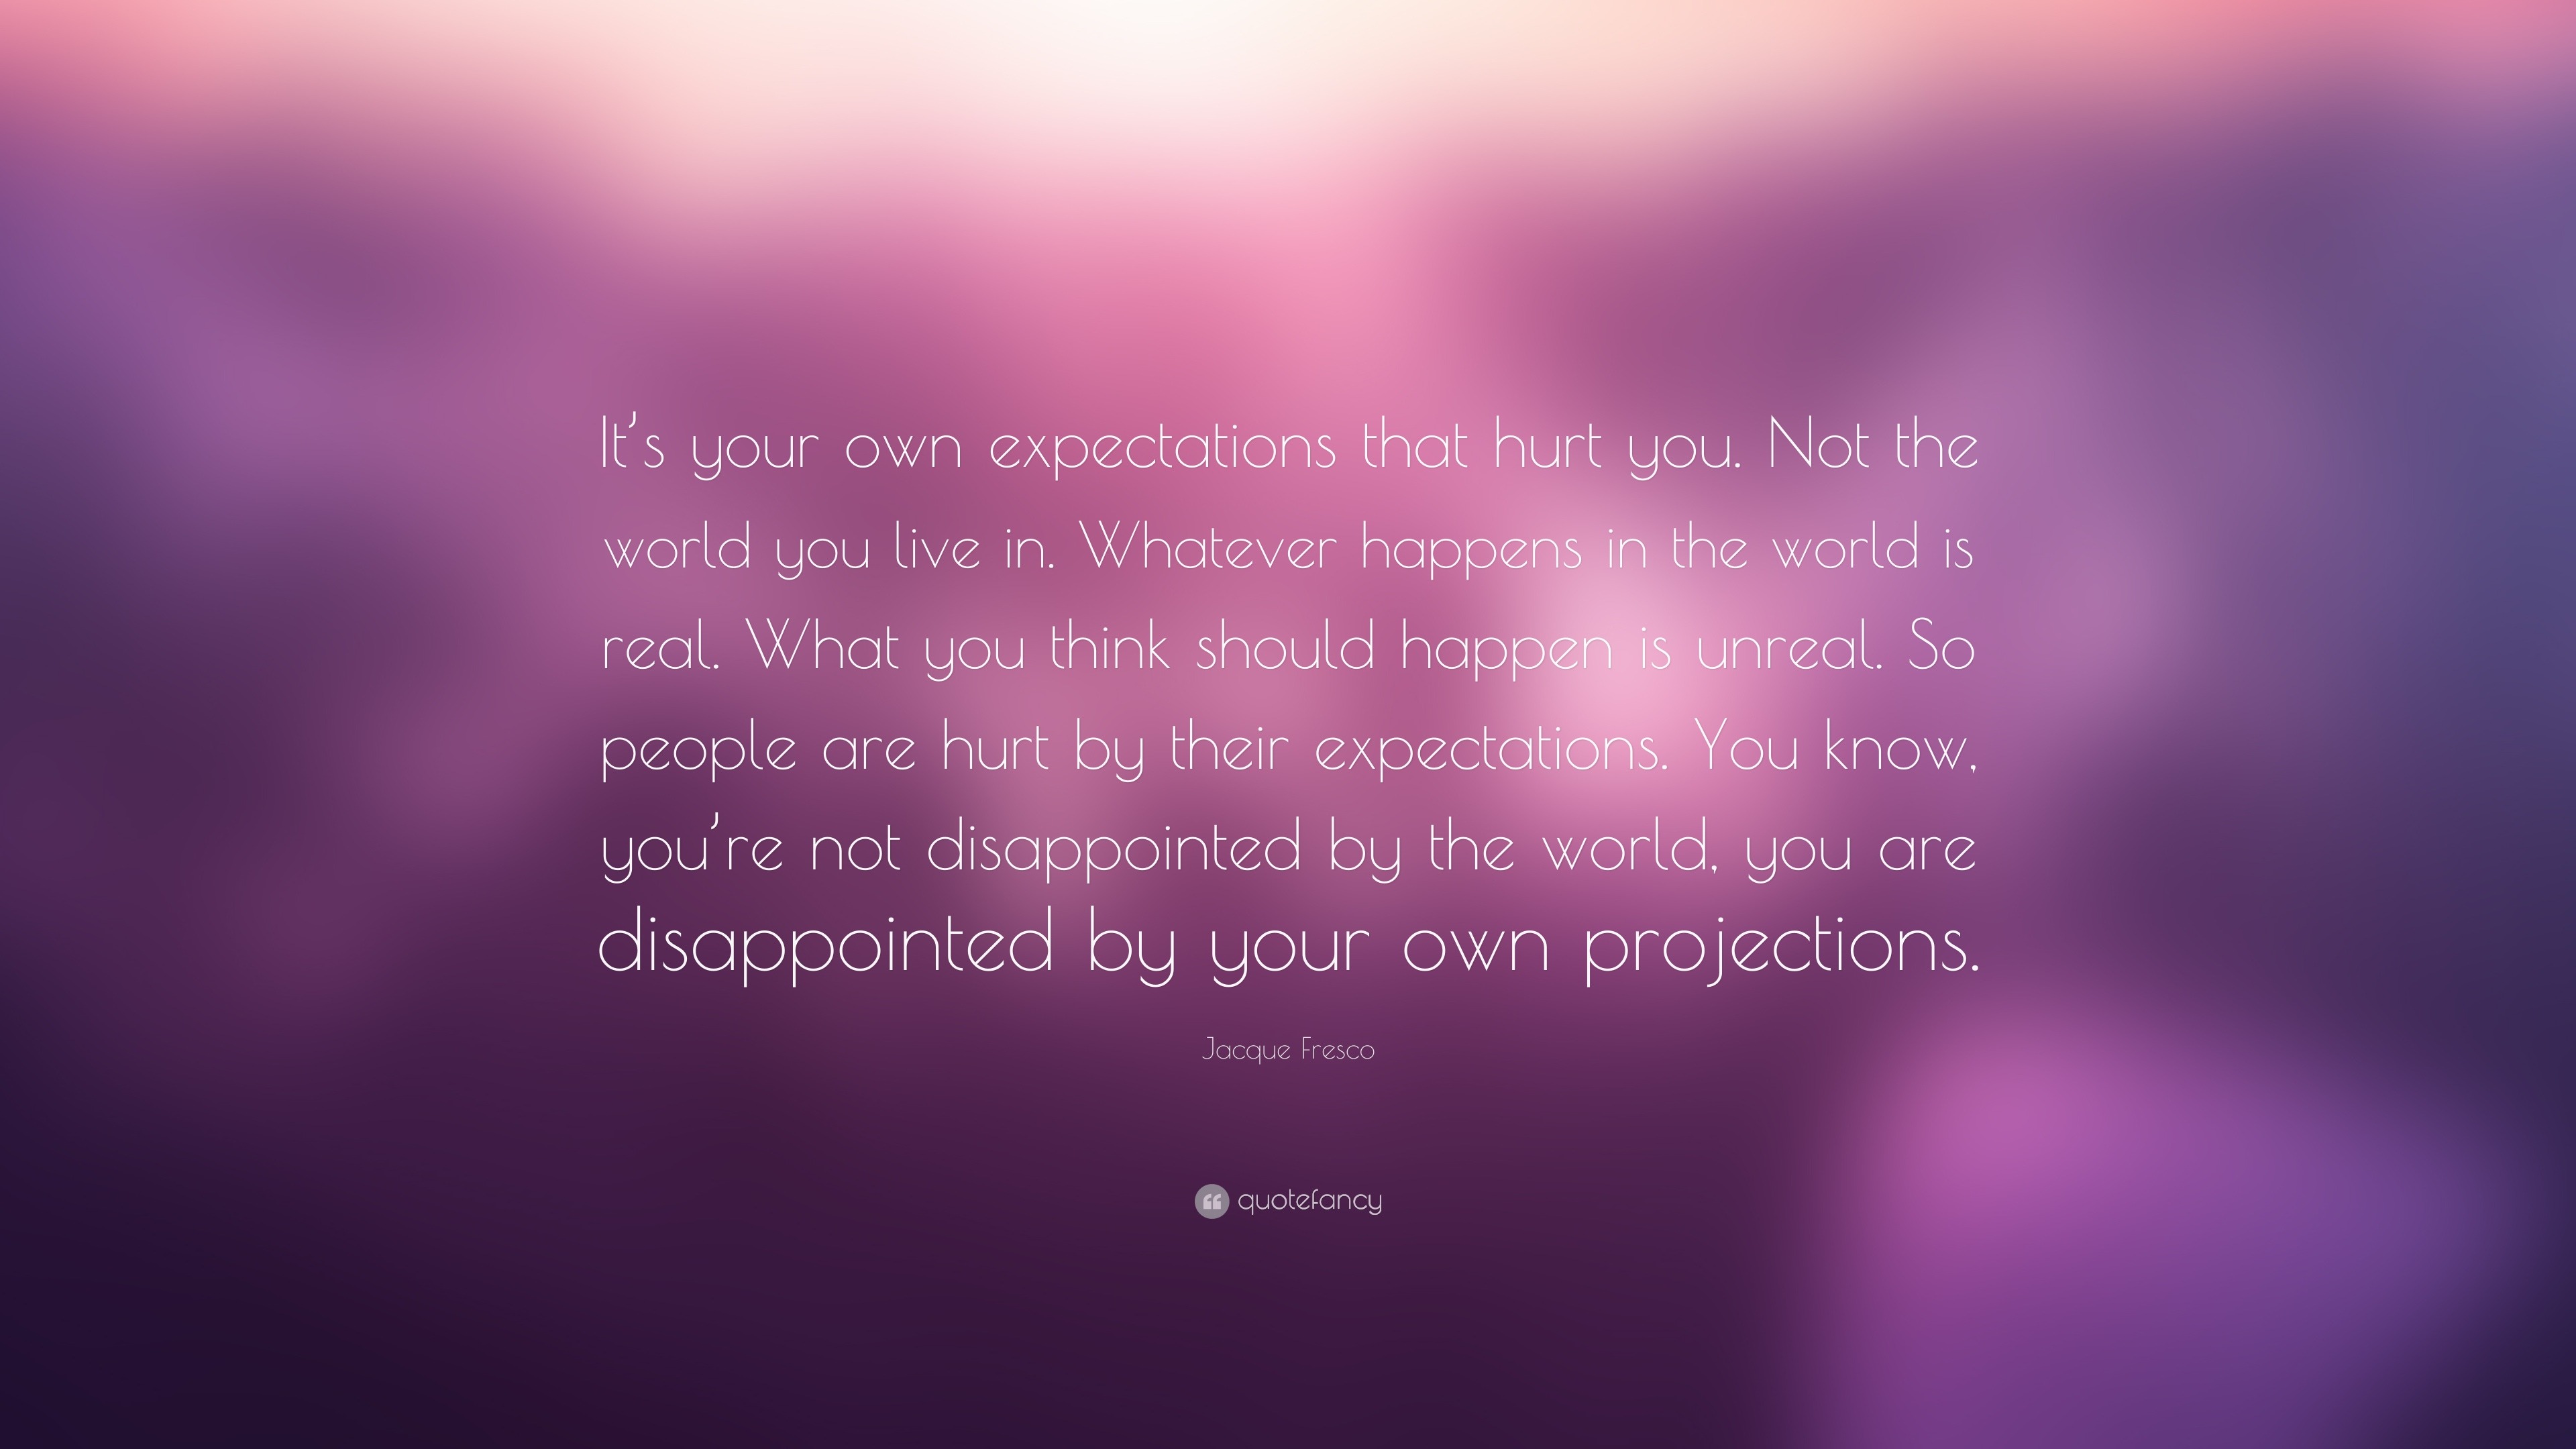 Jacque Fresco Quote “It’s your own expectations that hurt